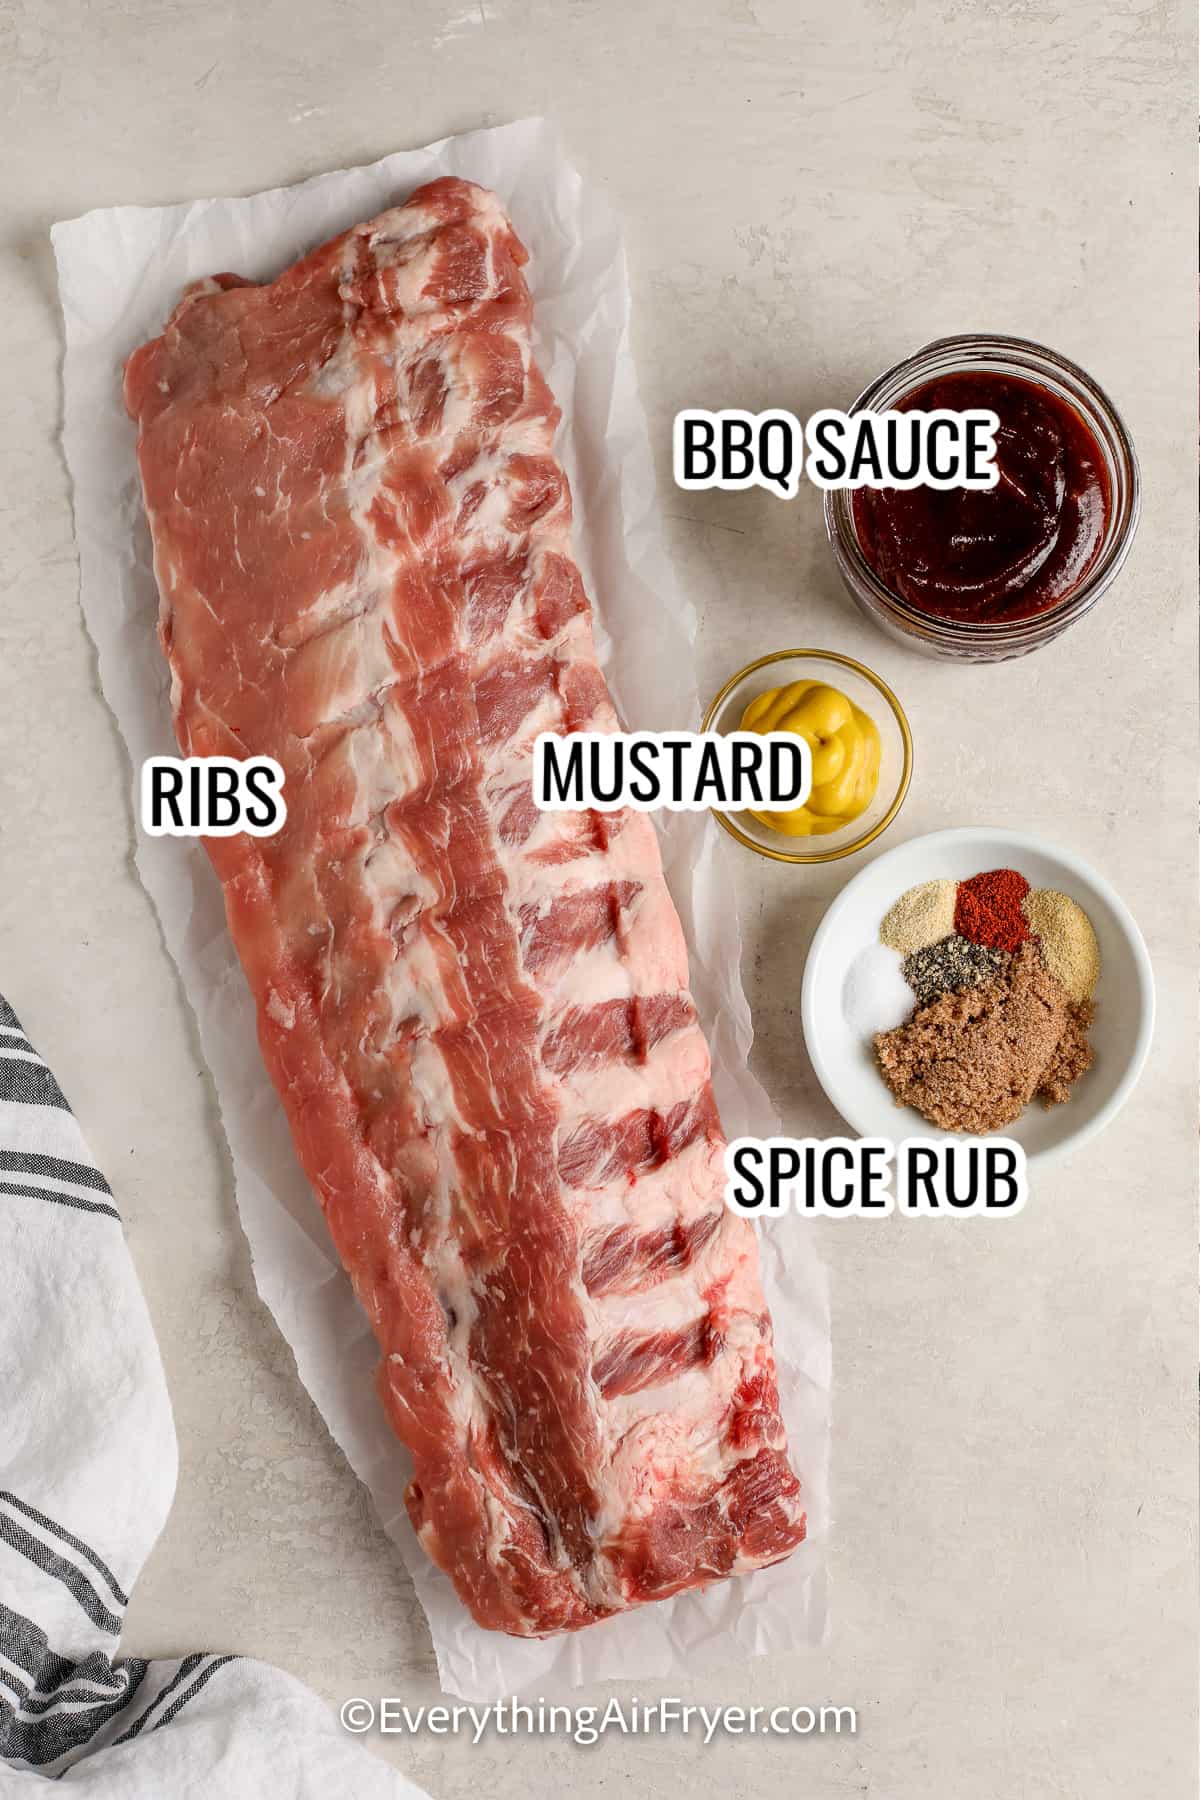 ingredients assembled to make air fryer ribs, including ribs, mustard, bbq sauce, and spices